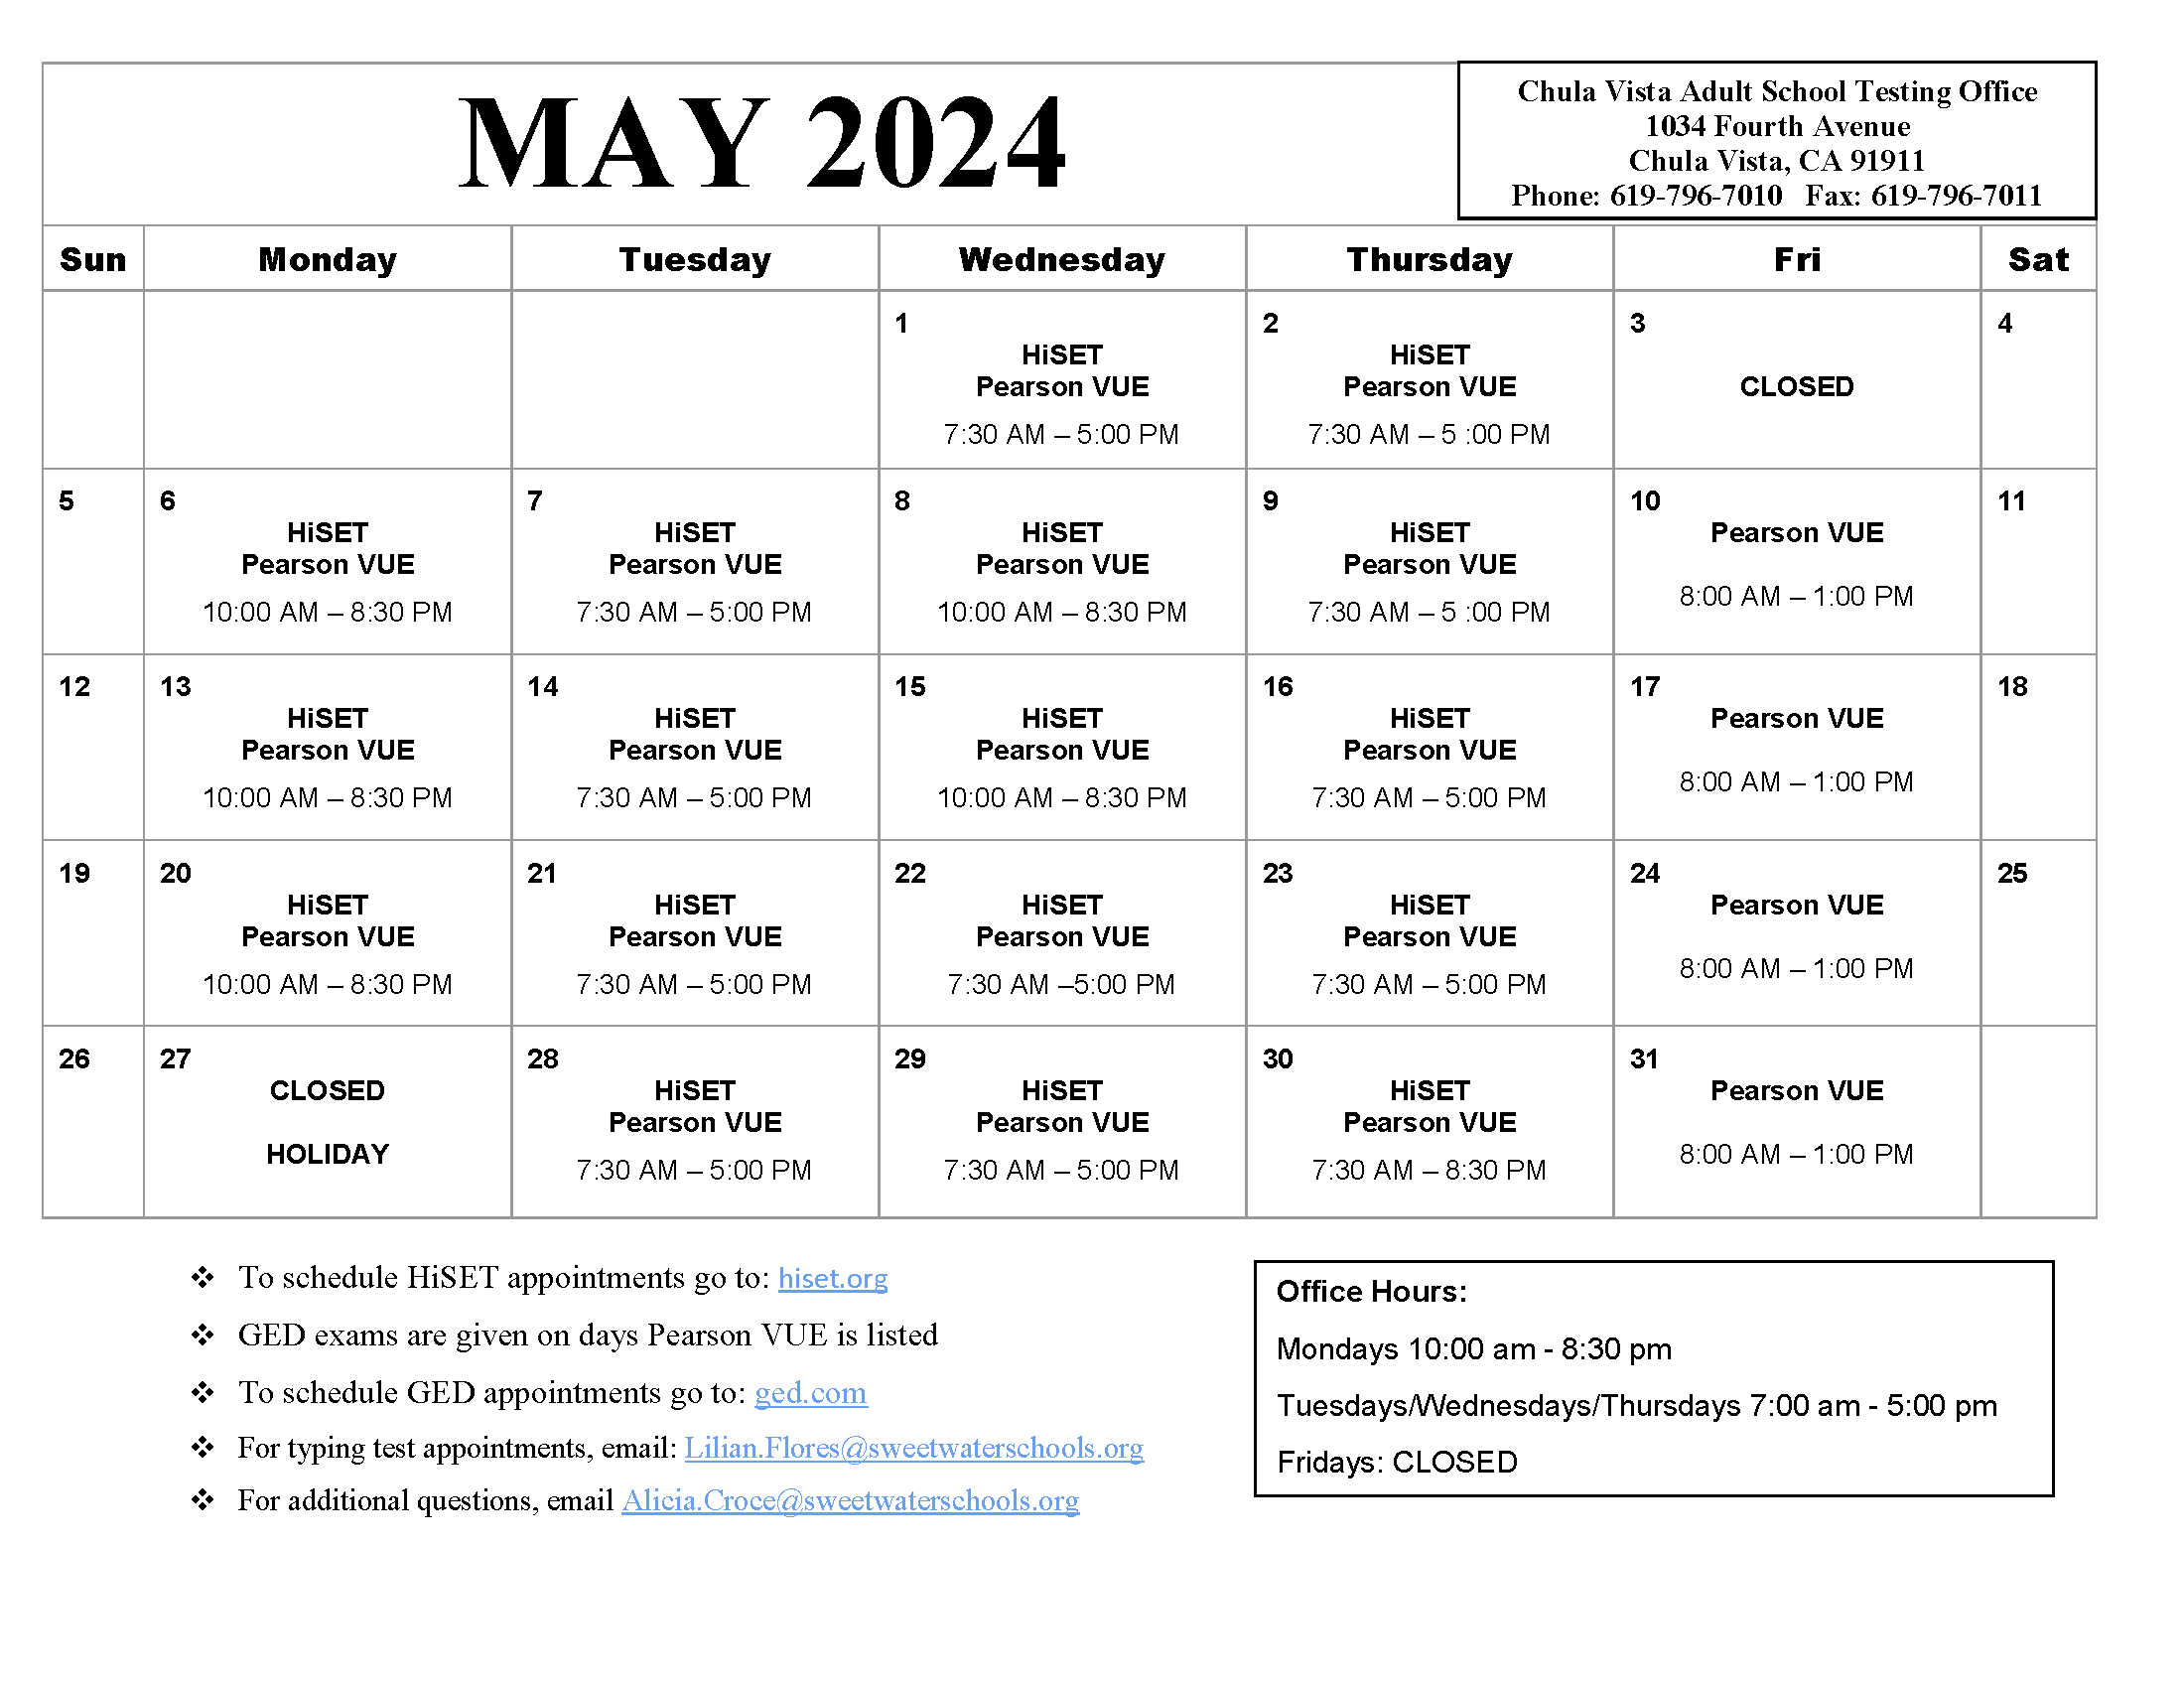 Modified May calendar including Friday hours for the Chula Vista testing center.